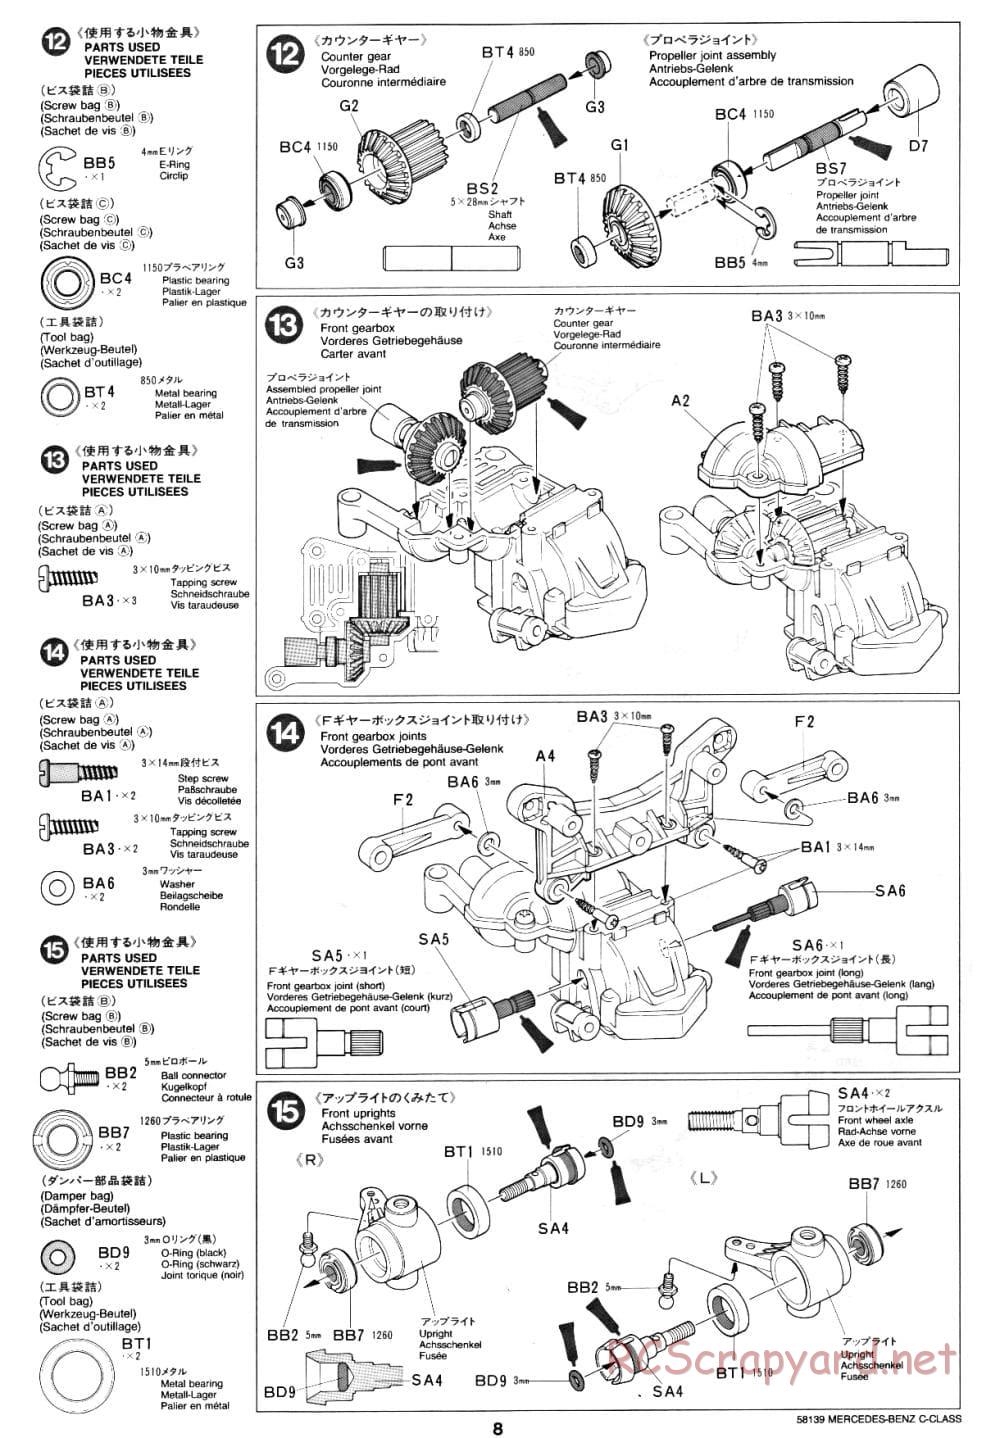 Tamiya - AMG Mercedes-Benz C-Class DTM D2 - TA-02 Chassis - Manual - Page 8